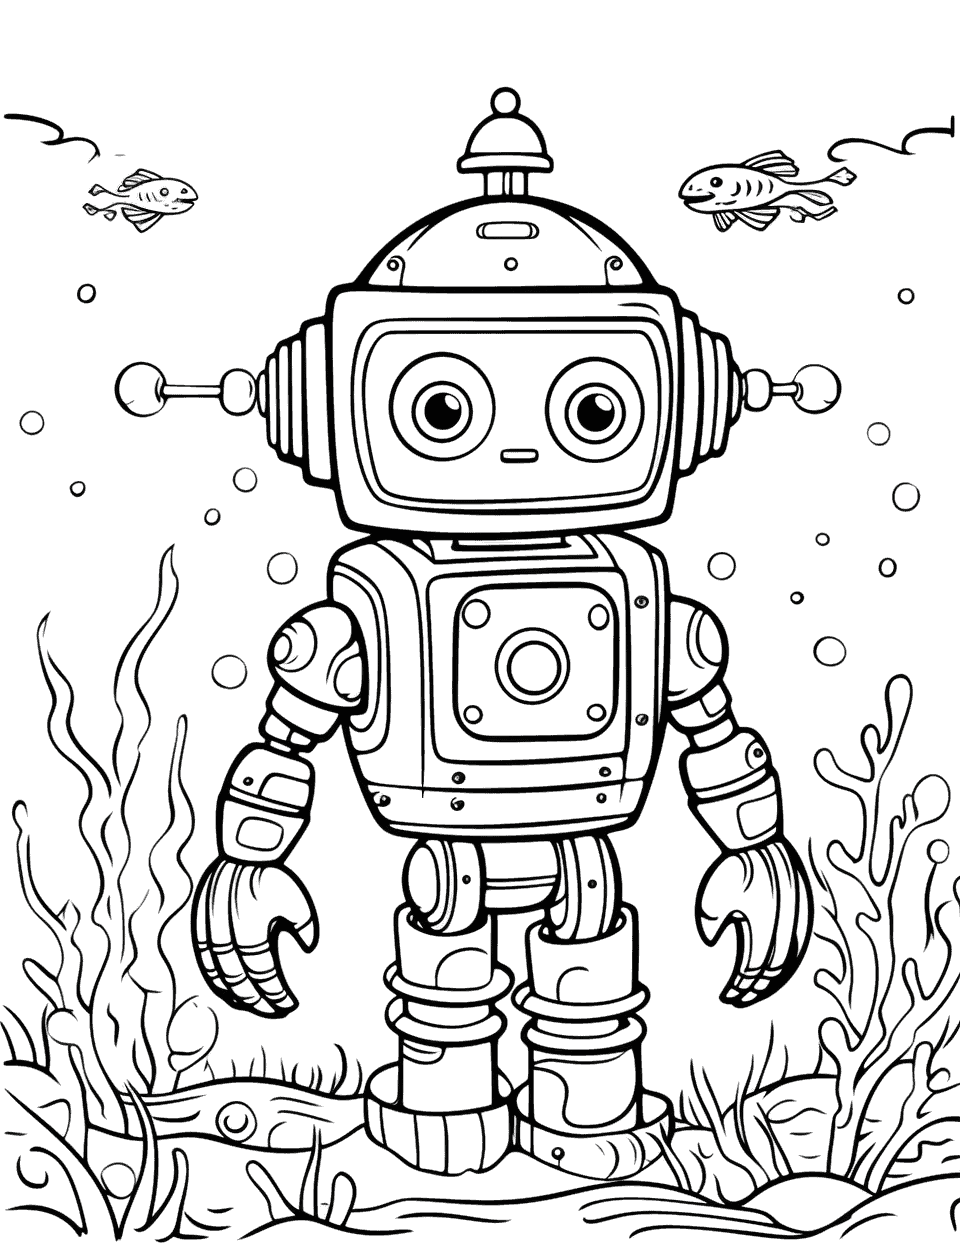 Underwater Robot Exploration Coloring Page - A robot exploring coral reefs underwater.